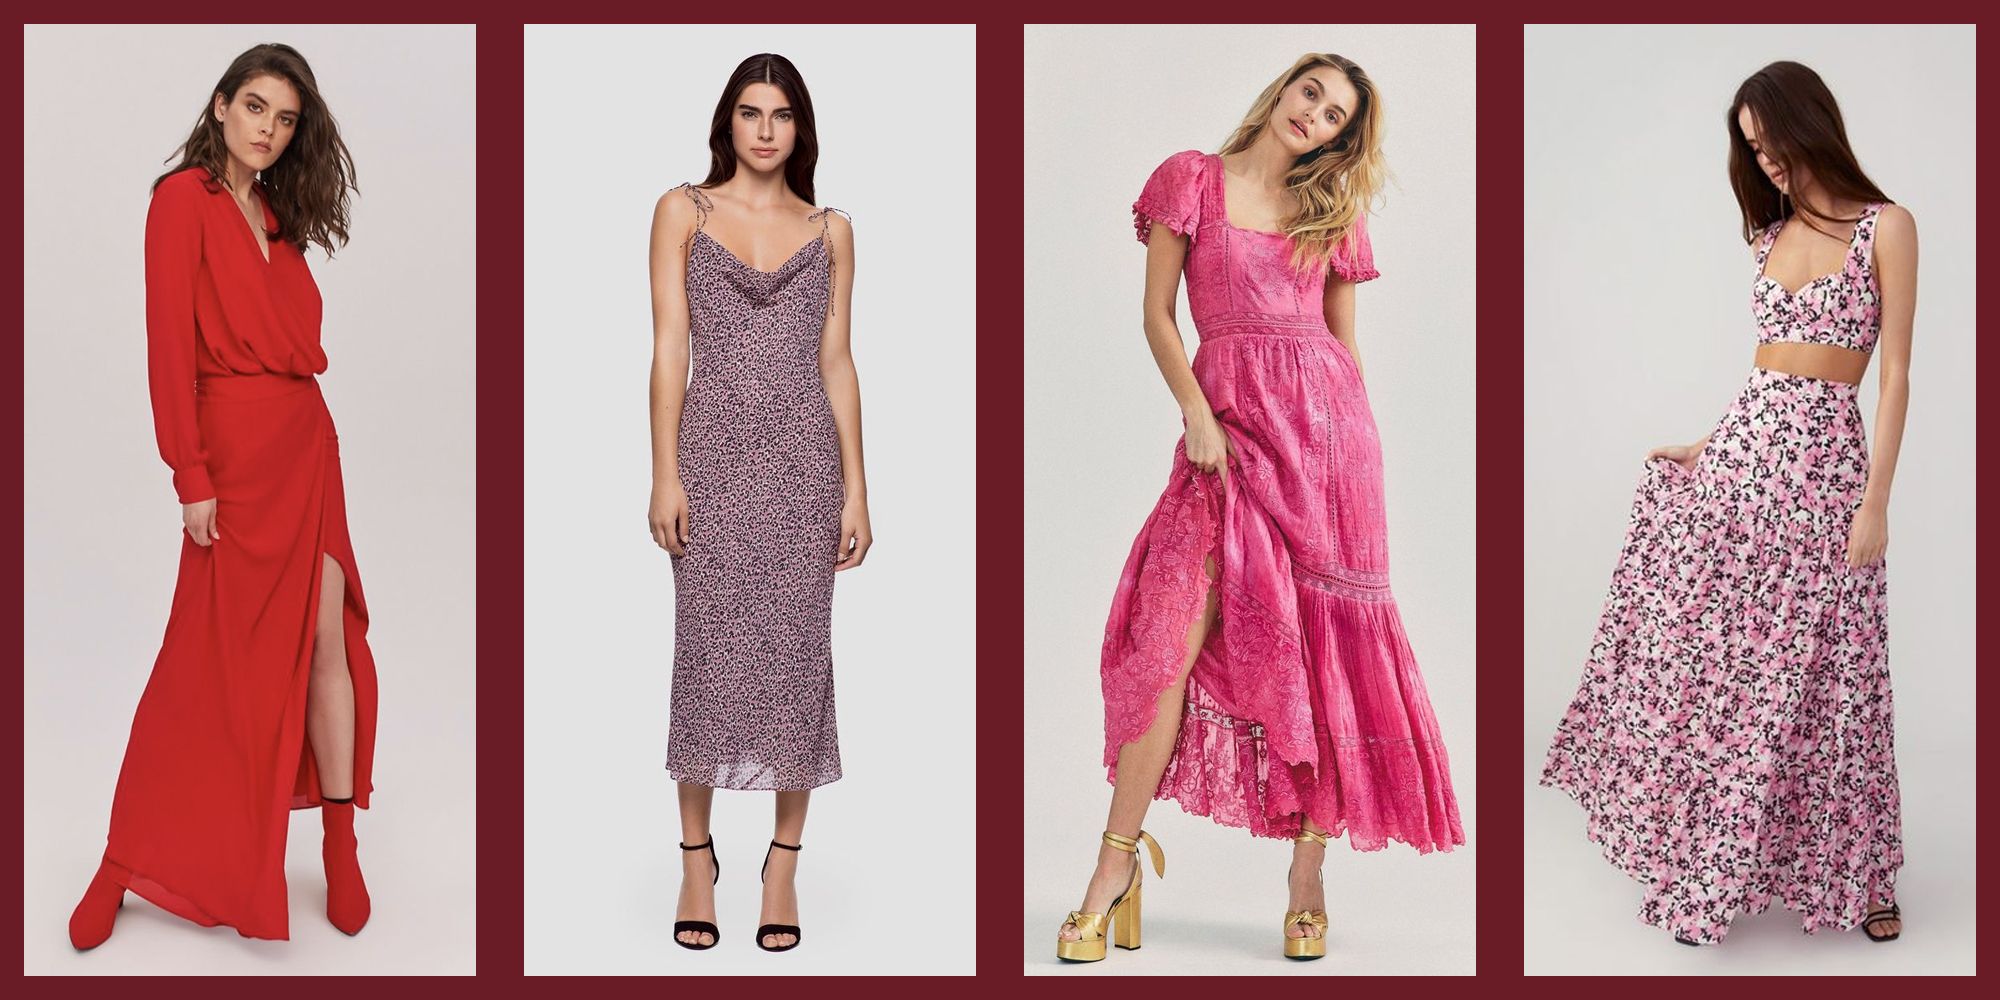 Best Valentine's Day Dresses for Any Occasion: Stylish Outfits to Shop